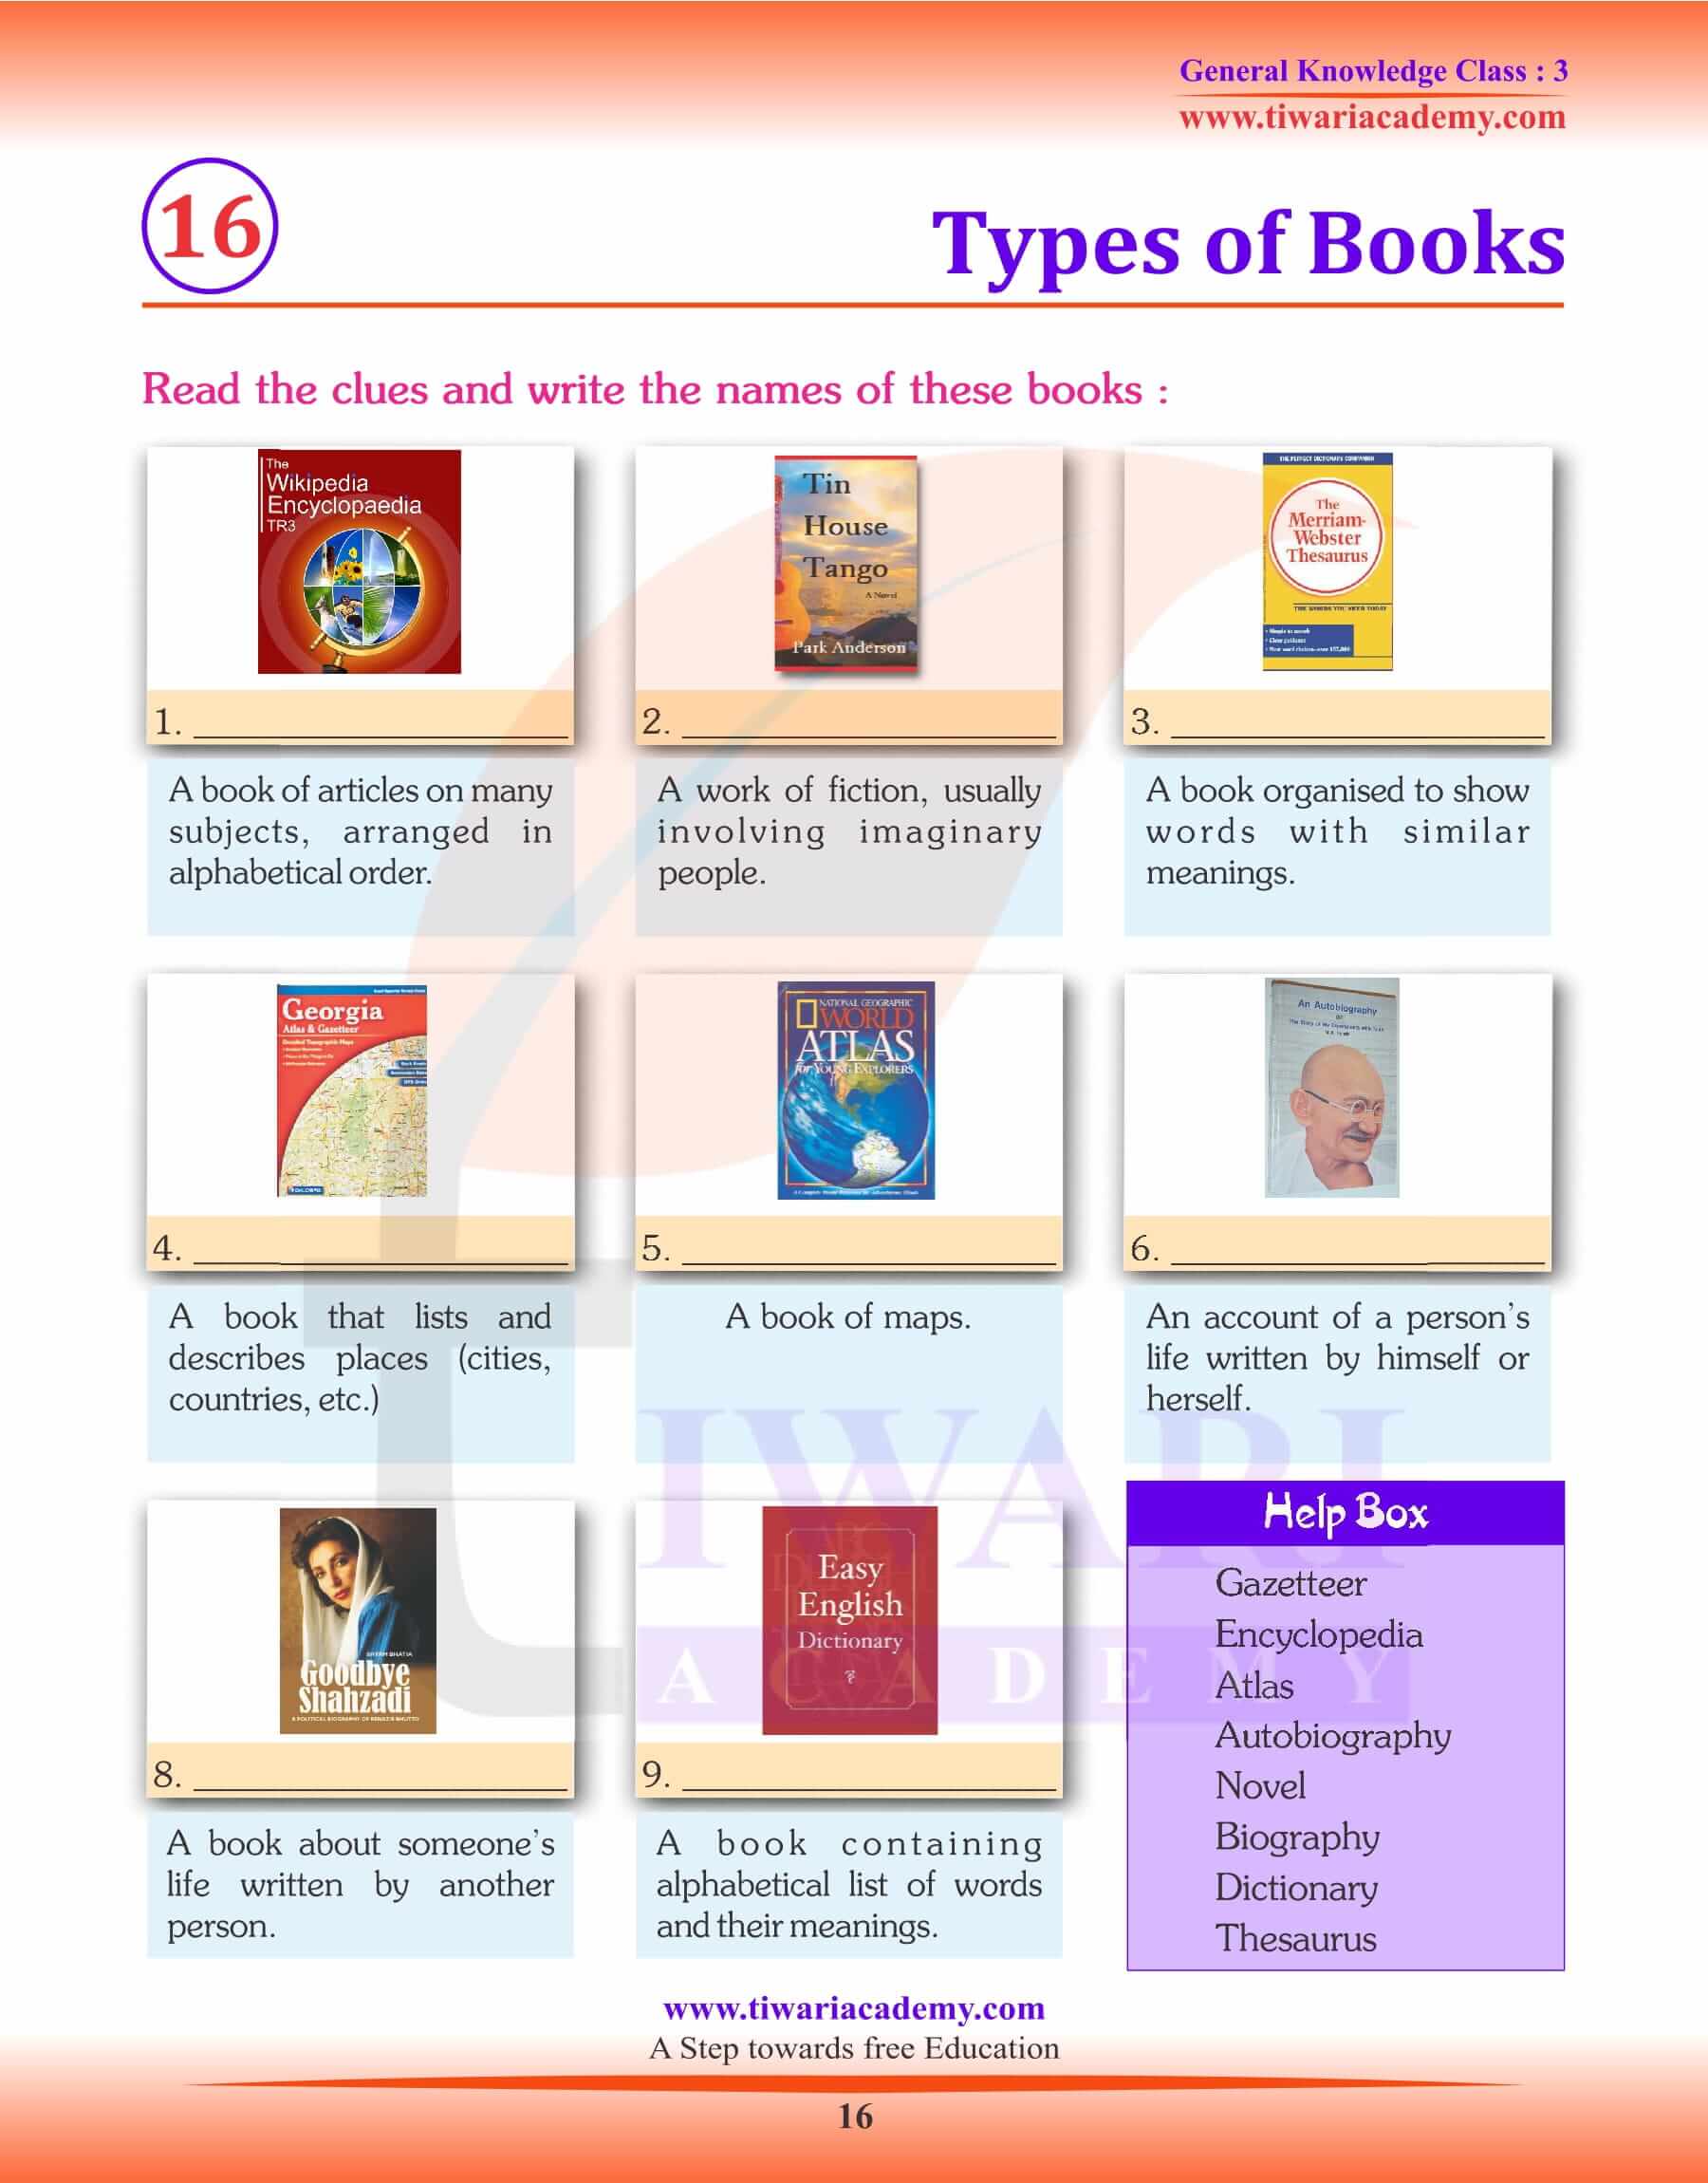 Types of Books